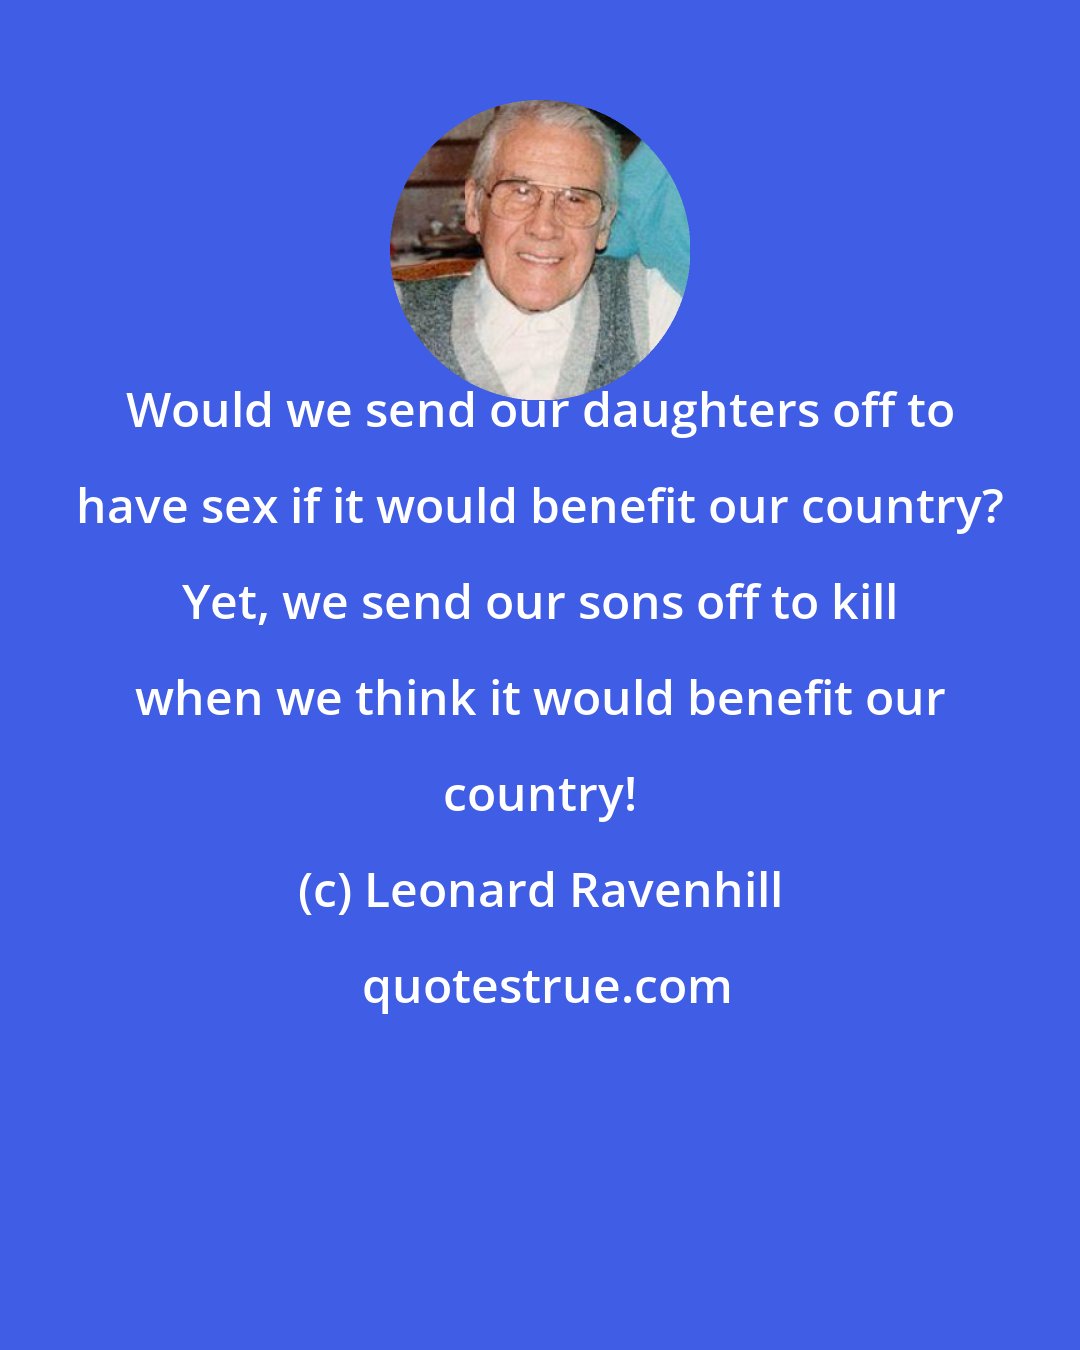 Leonard Ravenhill: Would we send our daughters off to have sex if it would benefit our country? Yet, we send our sons off to kill when we think it would benefit our country!